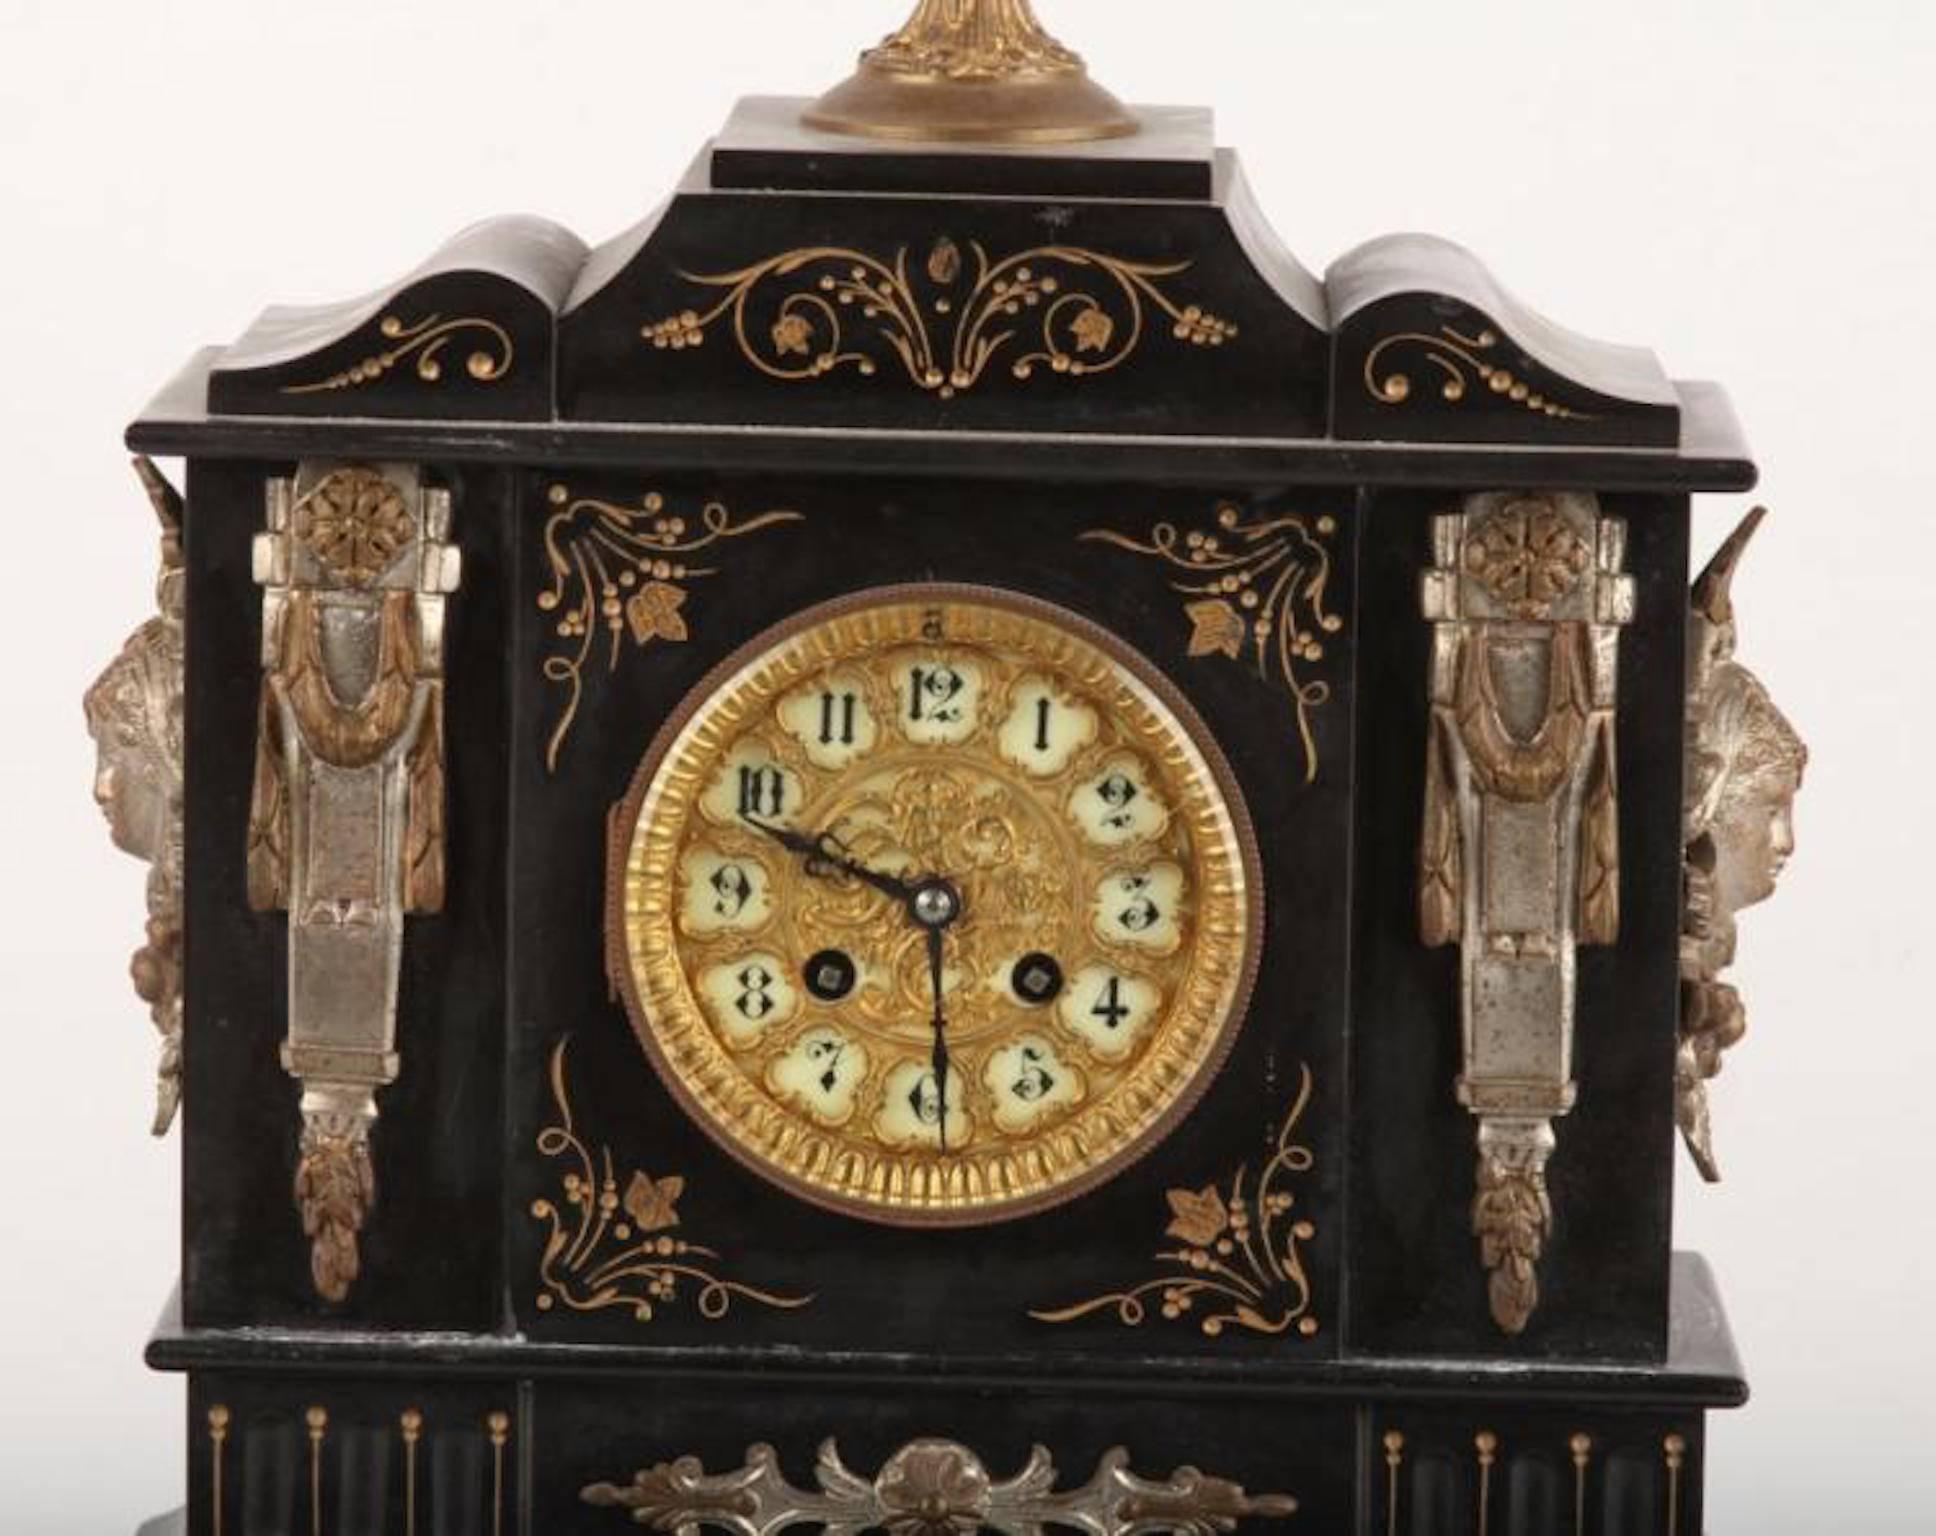 Black slate mantel clock by Ansonia late 19th century block and slate mantel clock. Engraved and gilded. Ceramic dial with brass garniture. Topped with an urn (top absent). A fine example of Victorian clocks. Size: 18.5